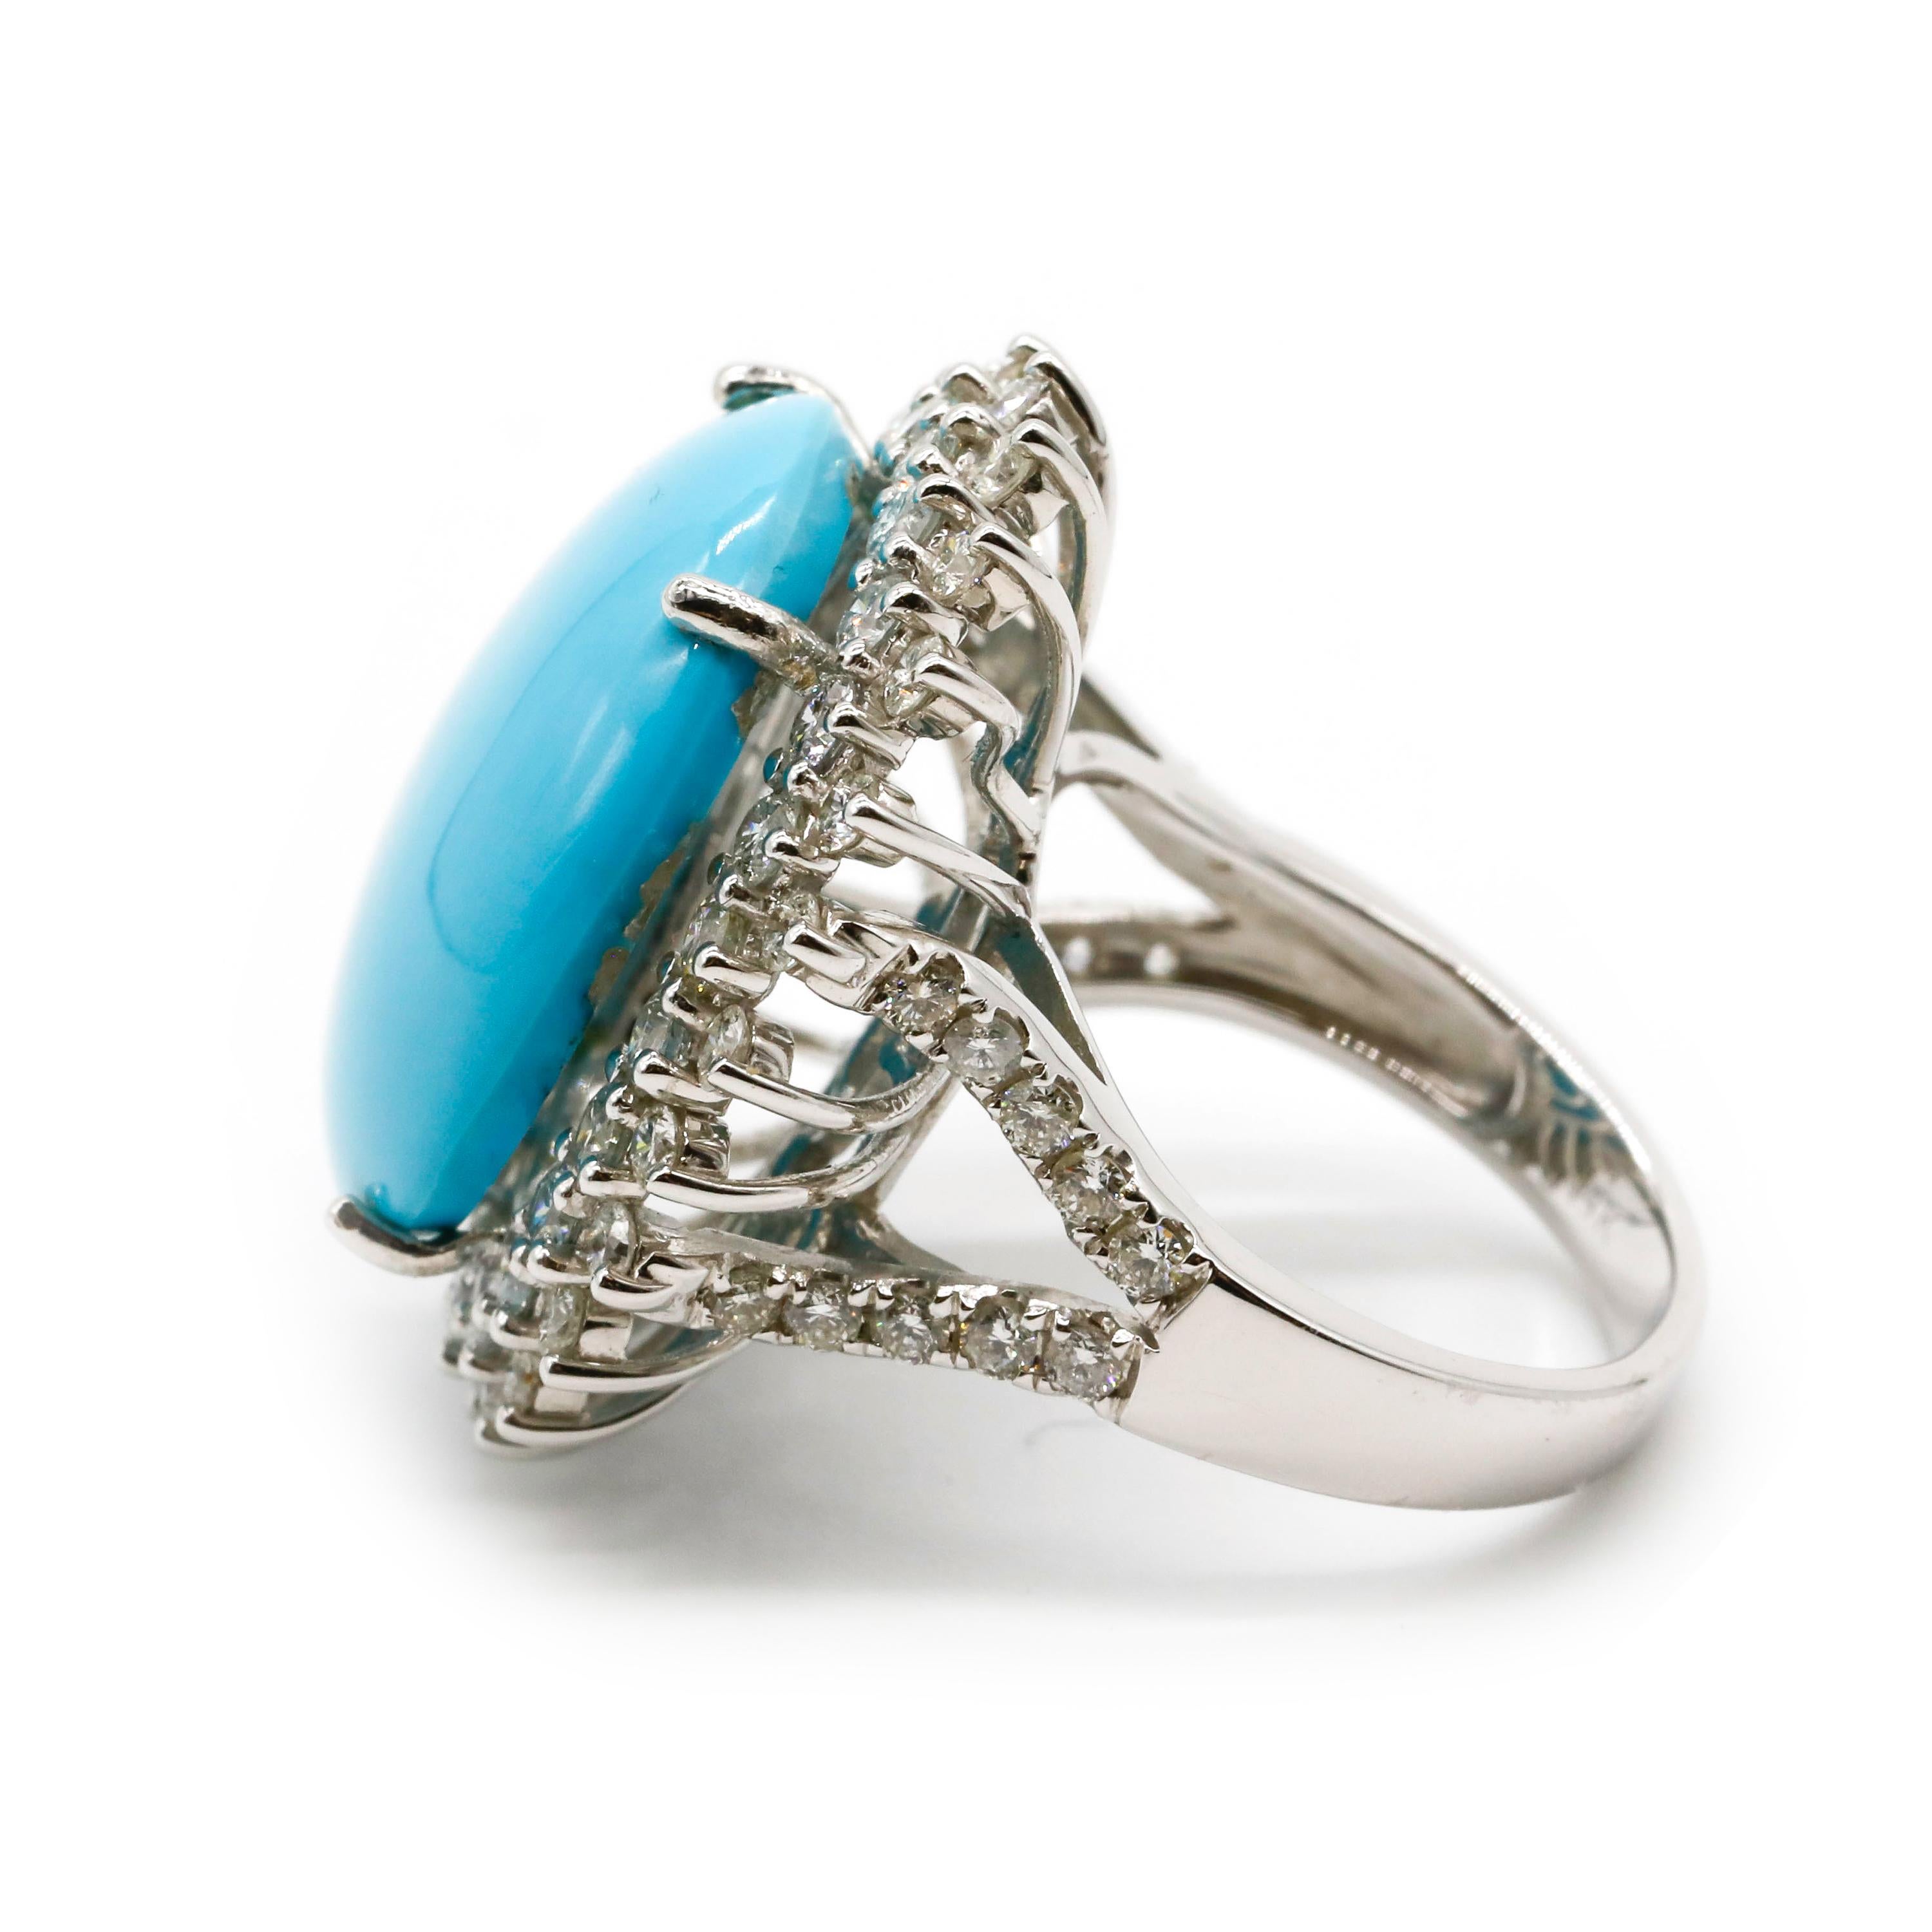 Diamond Pave 18 Karat White Gold 18.5 Carat Turquoise Solitaire Cocktail Ring

This modern ring features a total of 1.66 carats of diamond round shape and 18.5 Carat Turquoise Gemstone Set in 18K White Gold.

We guarantee all products sold and our